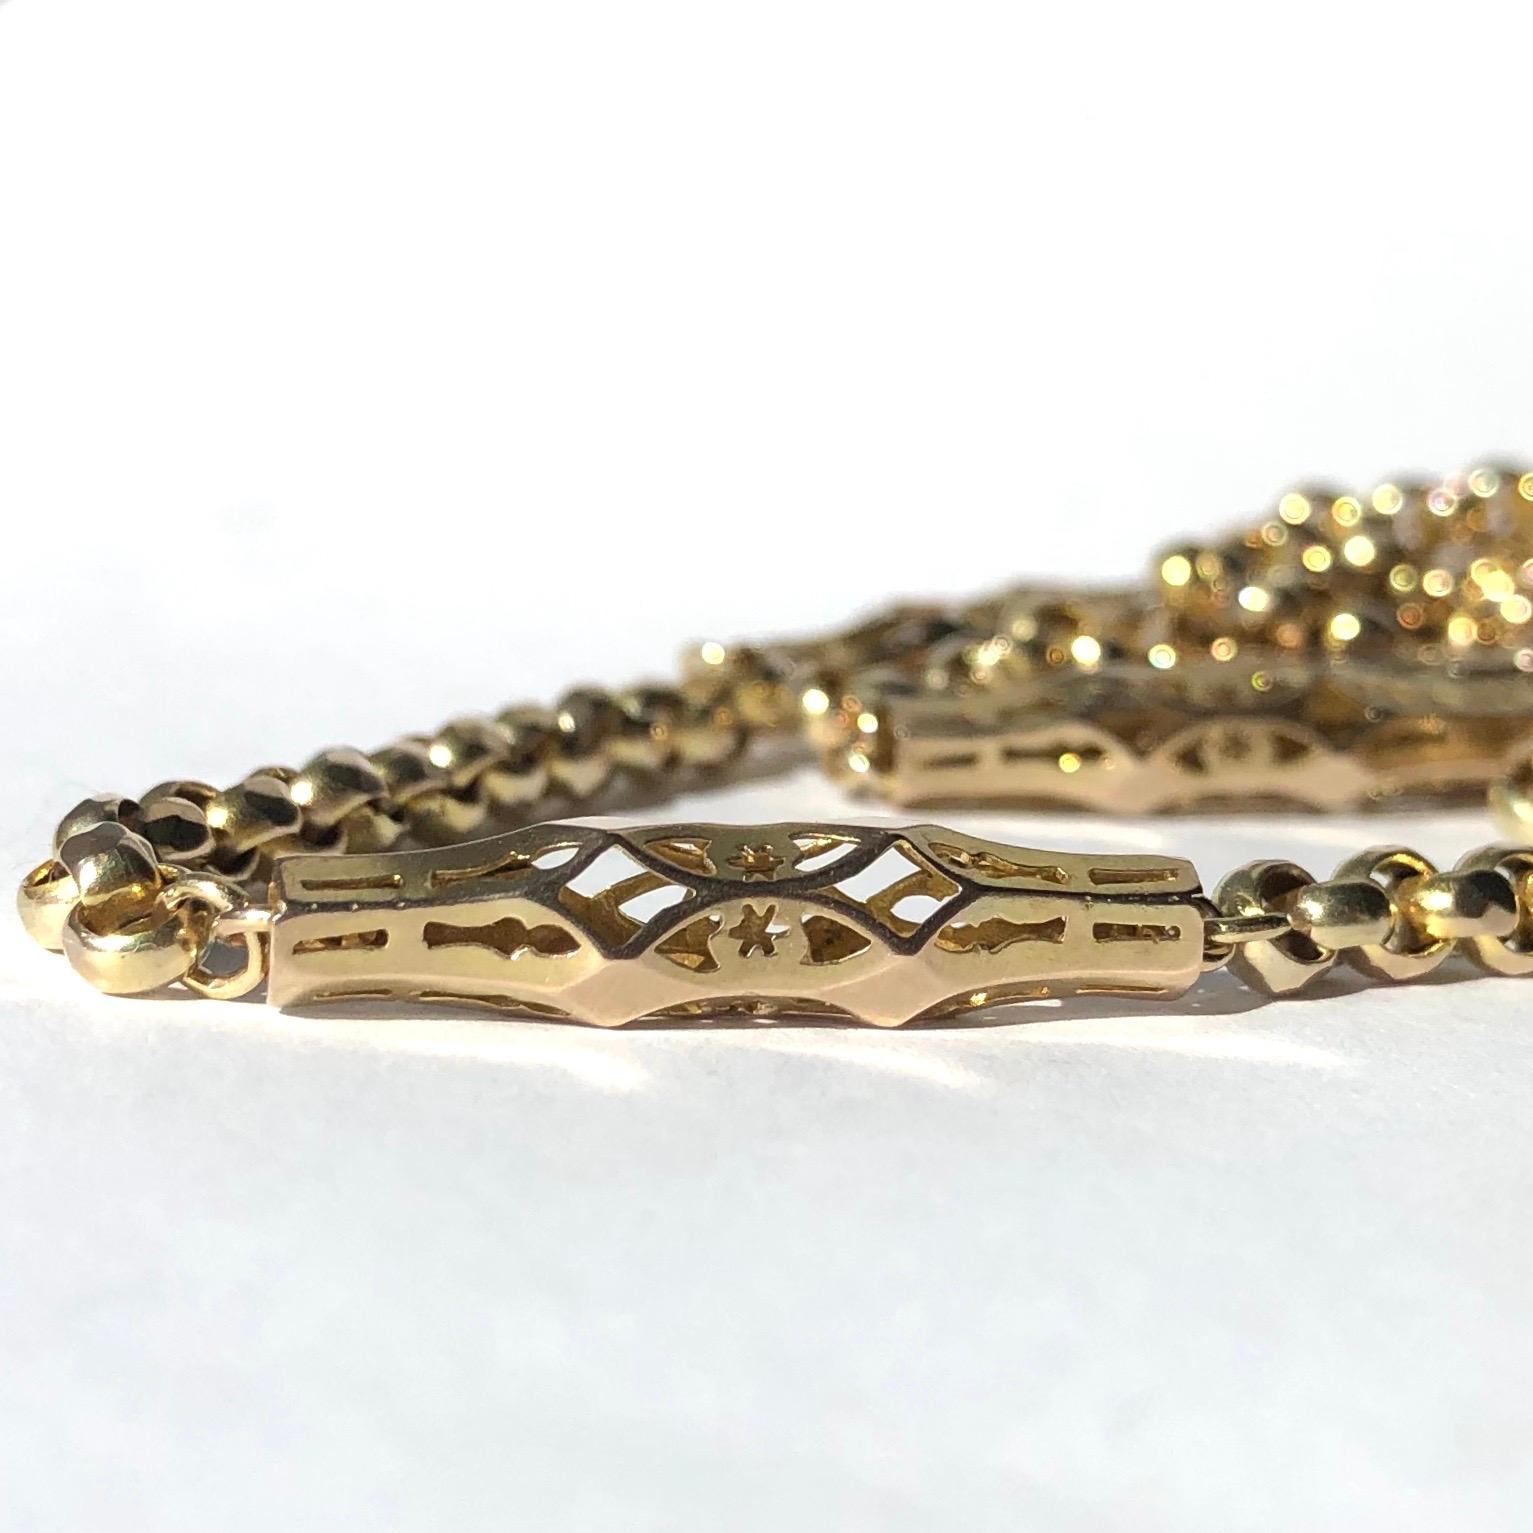 The links on this chain are simply stunning! They measure 22mm long and the open work gold is so delicate and ornate. Connecting these links is a classic belcher style chain and there is a dog clip attached. 

Length: 153cm

Weight: 50.3g